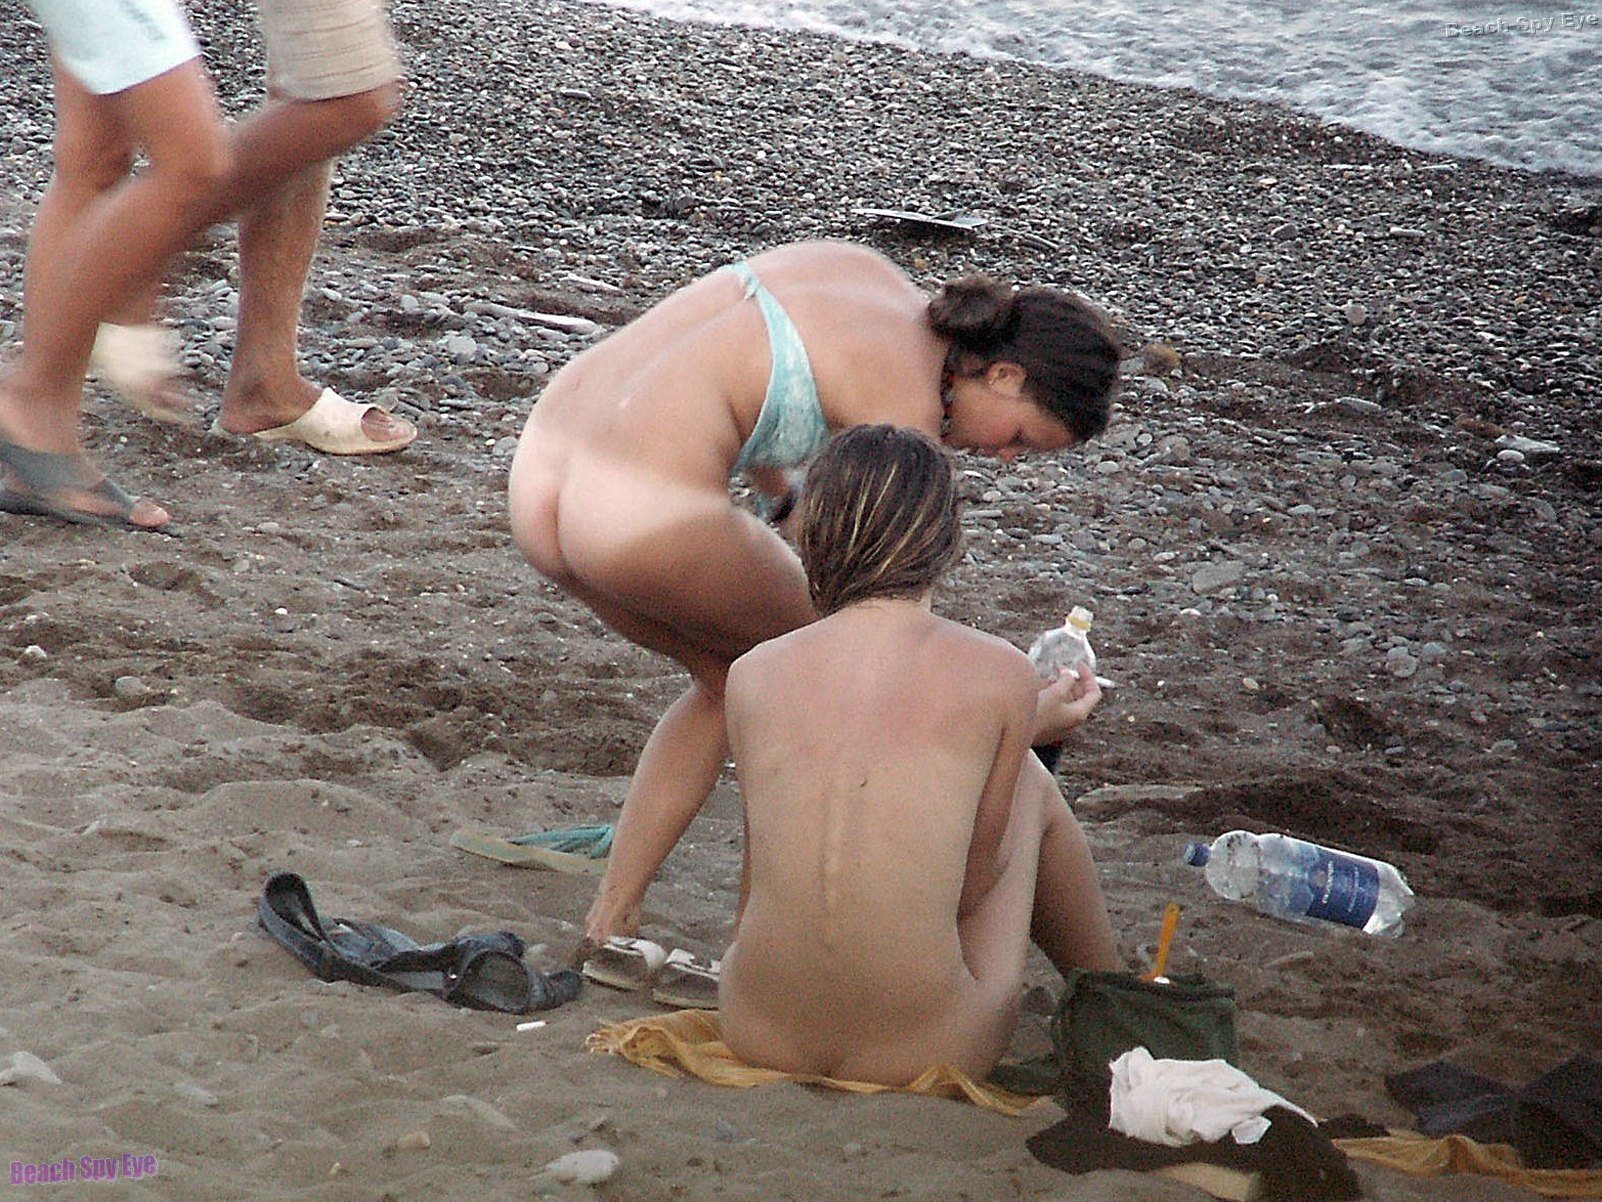 Bottomless on beaches Not fully naked girls - no panties View 6